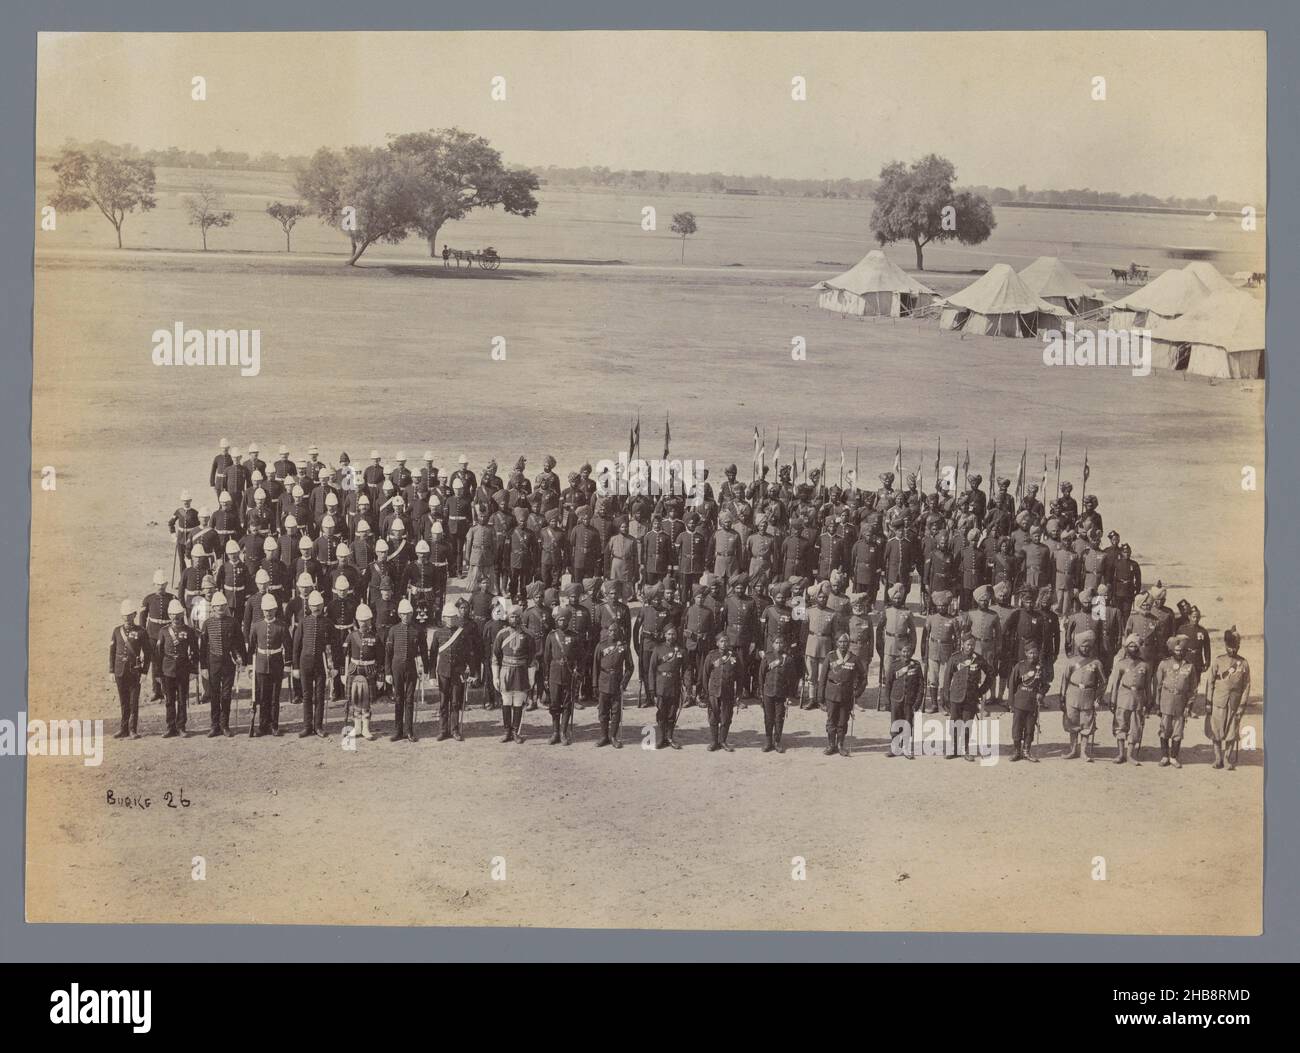 Army unit with English, Scottish, Indian and Afghan soldiers at a tented camp during the Second Anglo-Afghan War, John Burke (mentioned on object), Afghanistan, 1878 - 1880, paper, albumen print, height 210 mm × width 288 mm Stock Photo